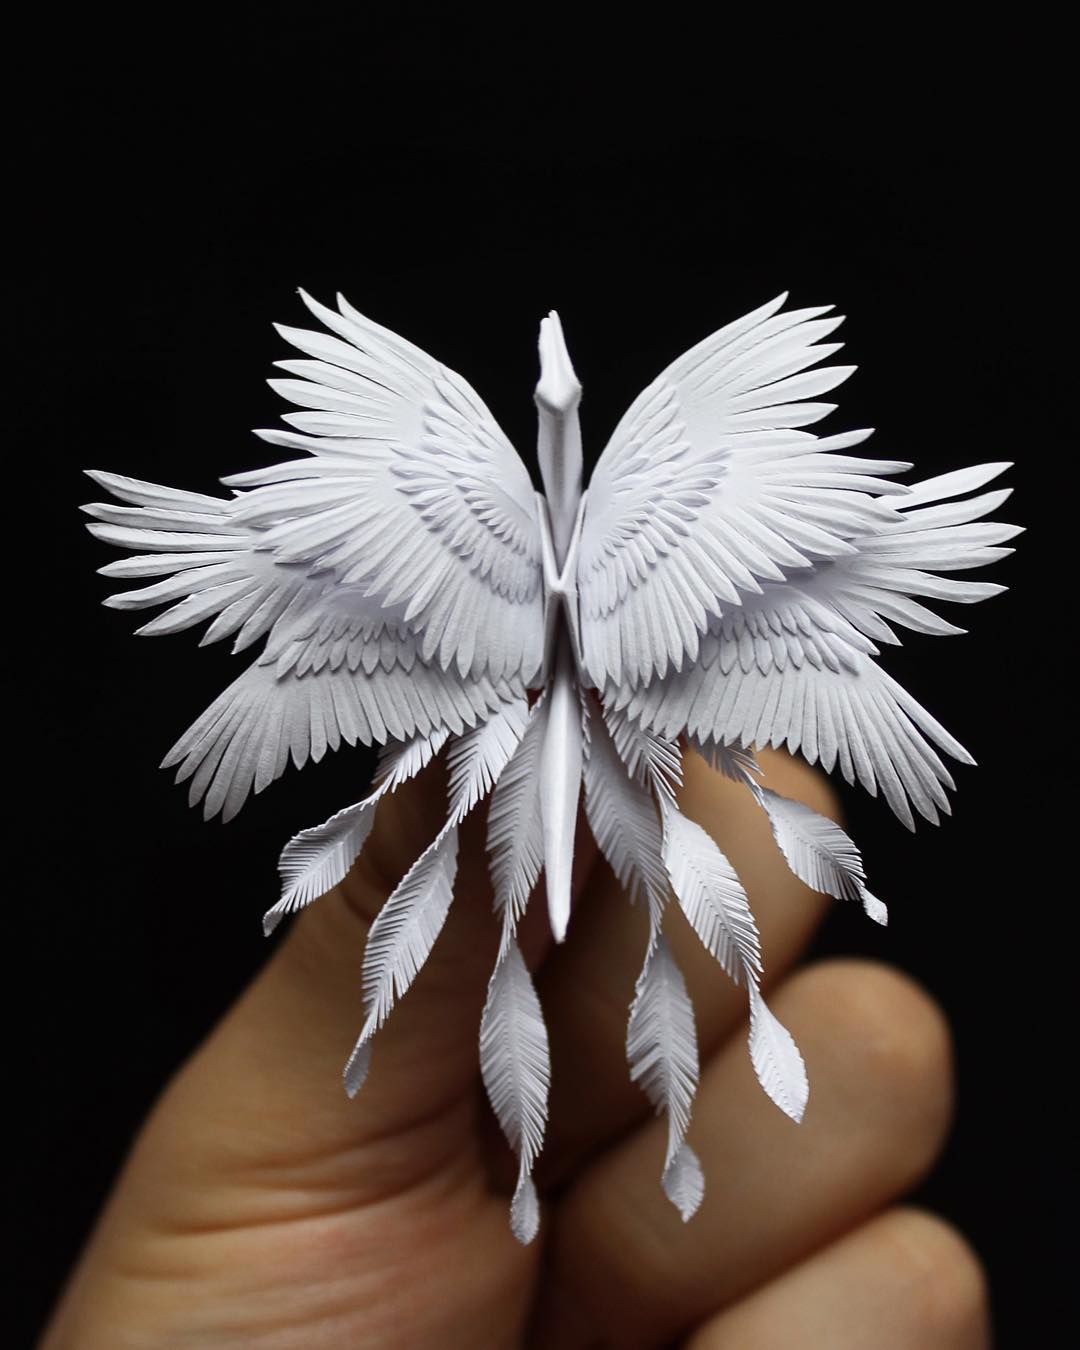 Amazing Origami Cranes with Feathery Details